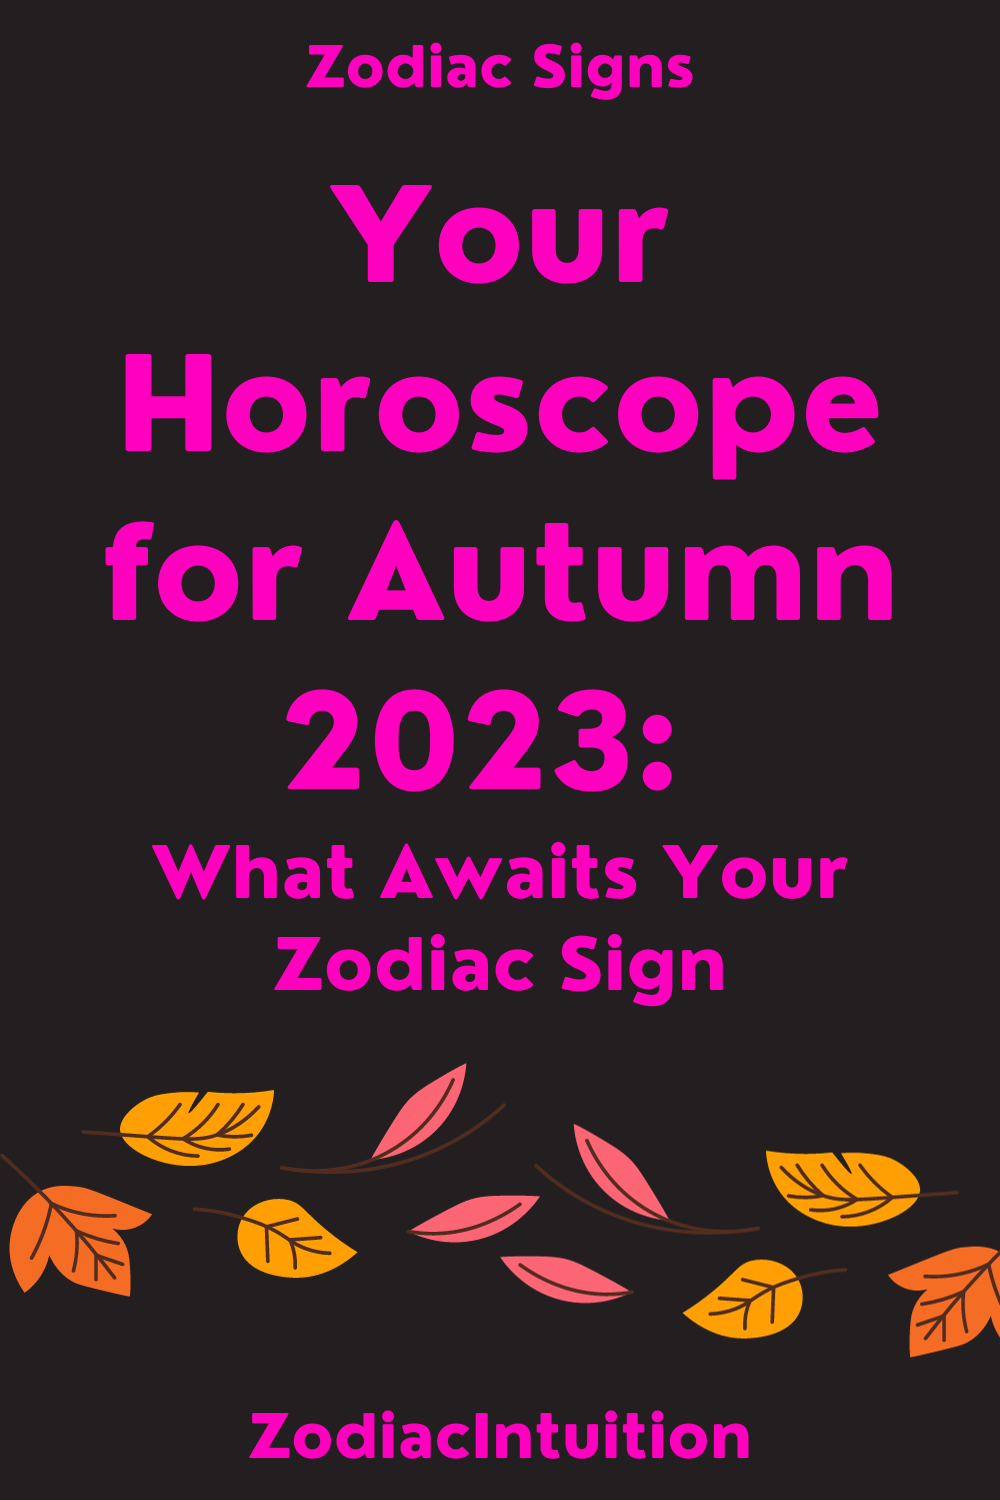 Your Horoscope for Autumn 2023: What Awaits Your Zodiac Sign